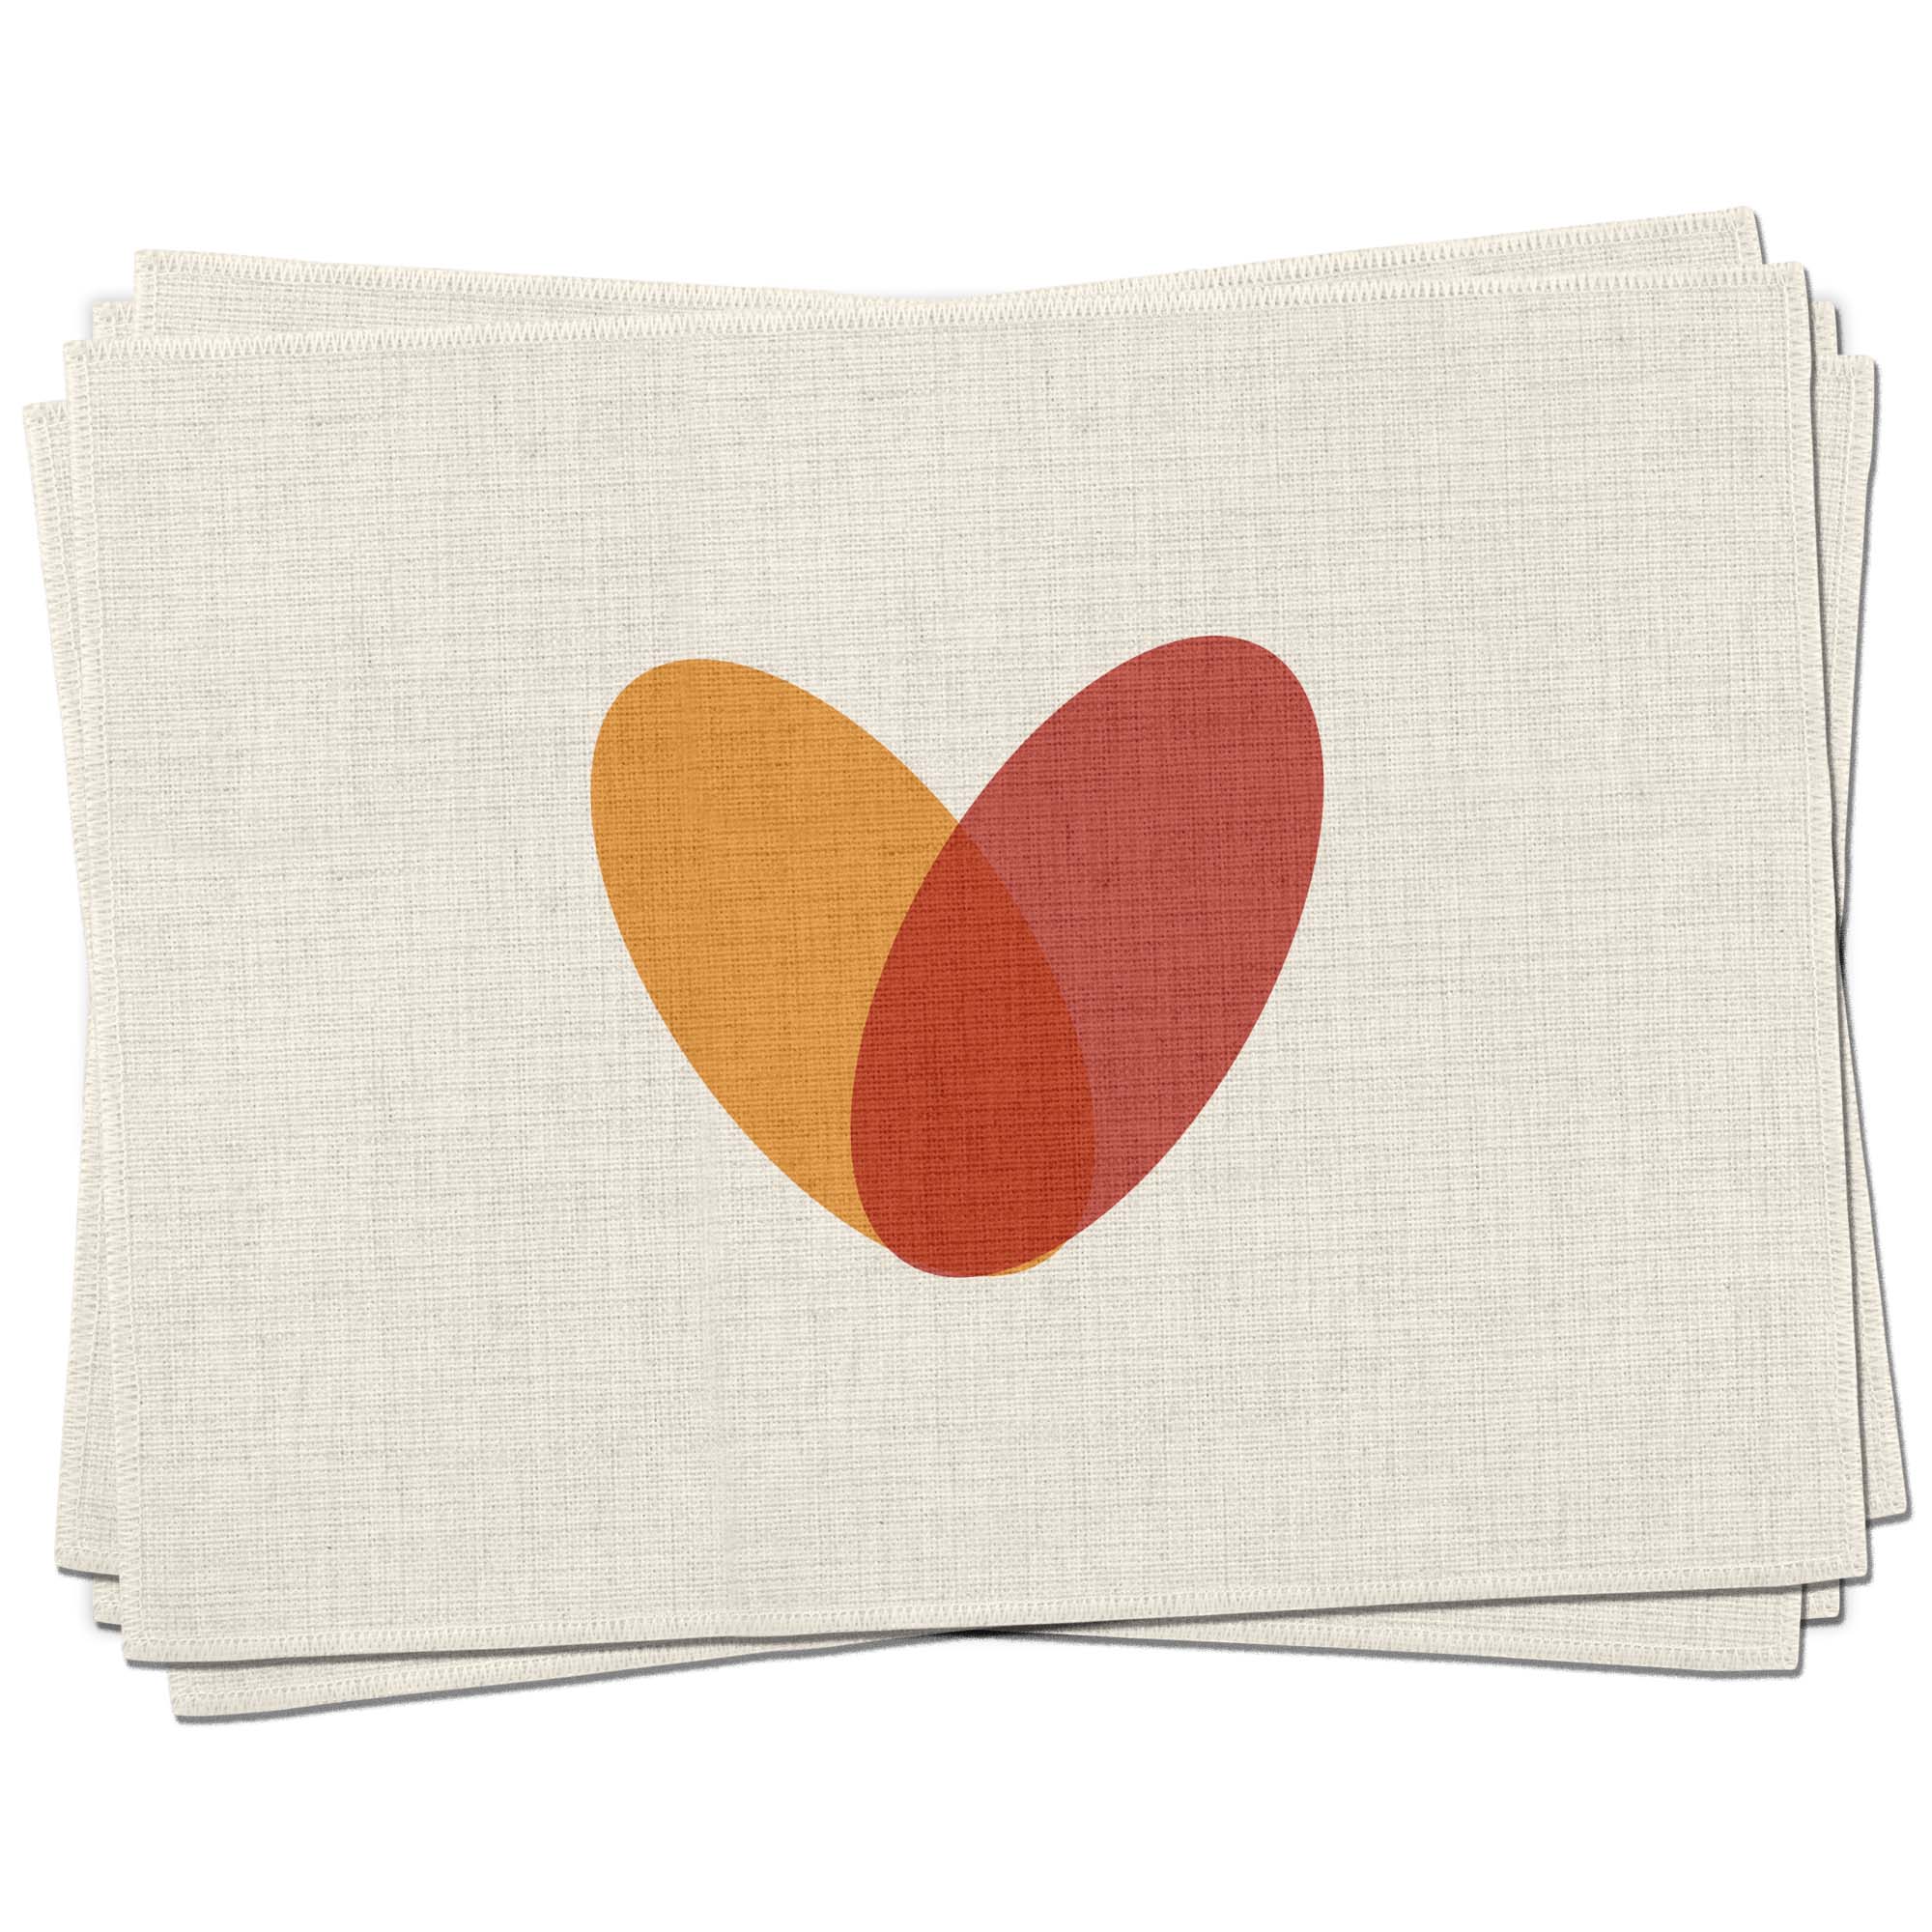 Stack of linen effect placements featuring a graphic heart design made from two overlaid ovals, one in orange and one in red. Mustard & Gray Placemats.